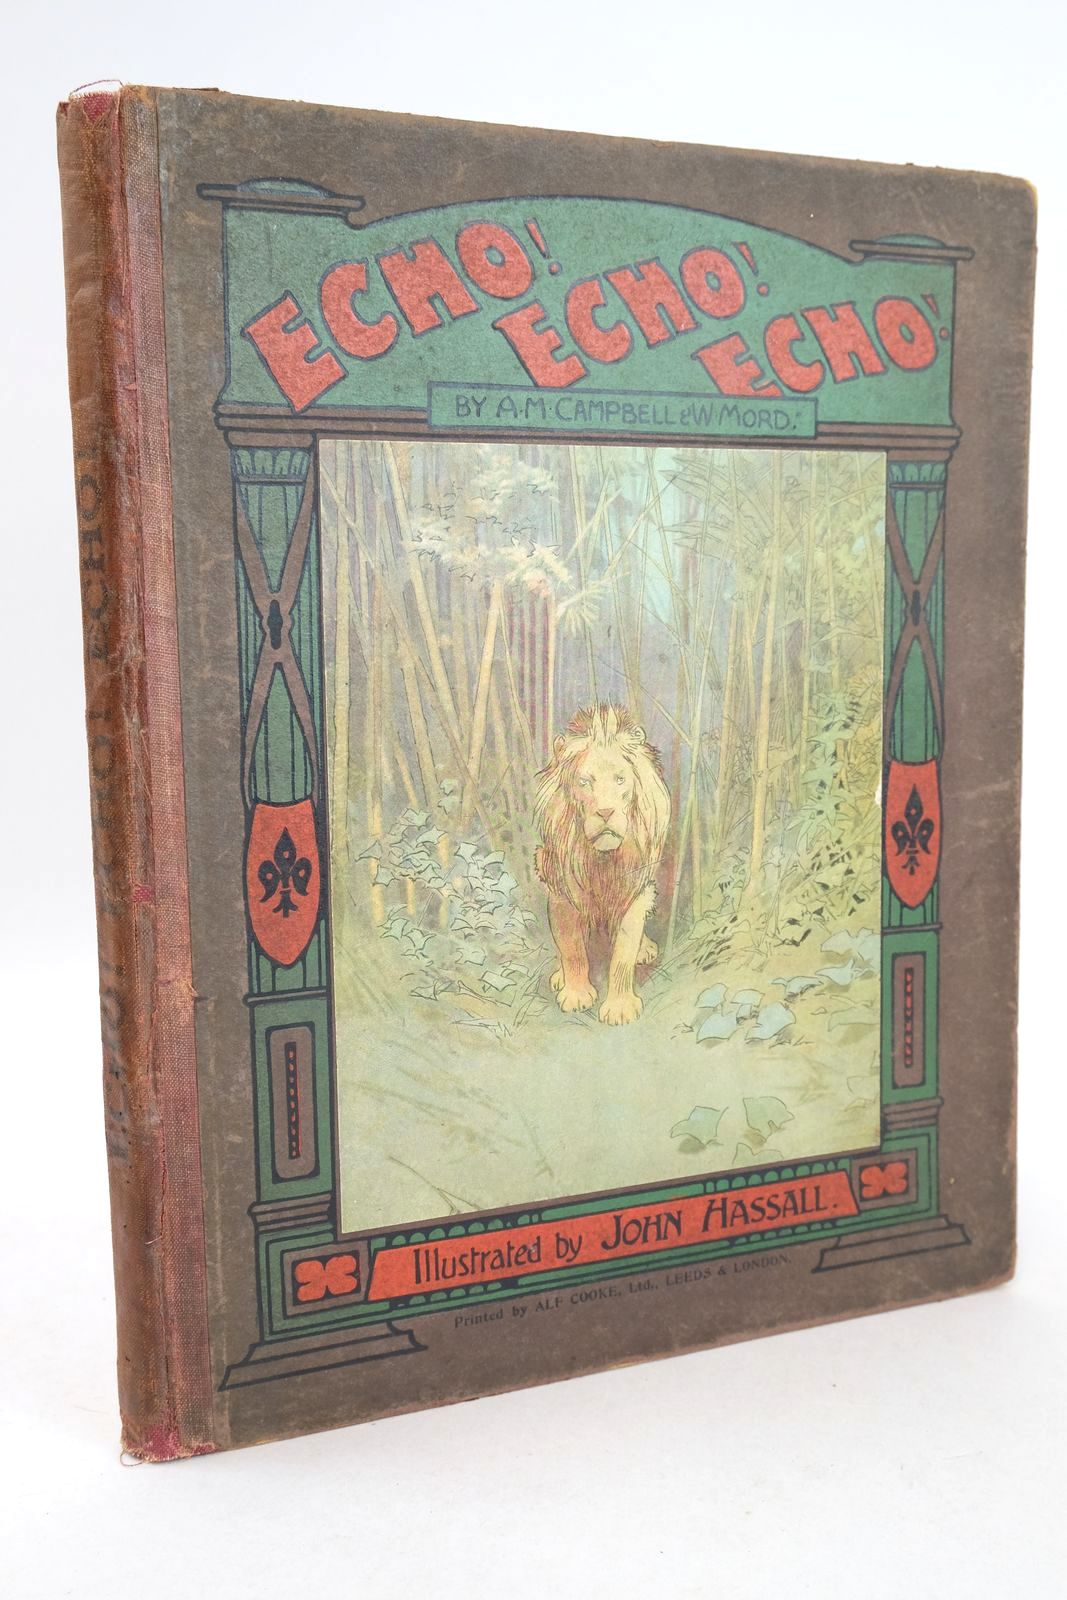 Photo of ECHO! ECHO! ECHO! written by Campbell, A.M. Mord, W. illustrated by Hassall, John published by Alf Cooke Ltd. (STOCK CODE: 1325881)  for sale by Stella & Rose's Books